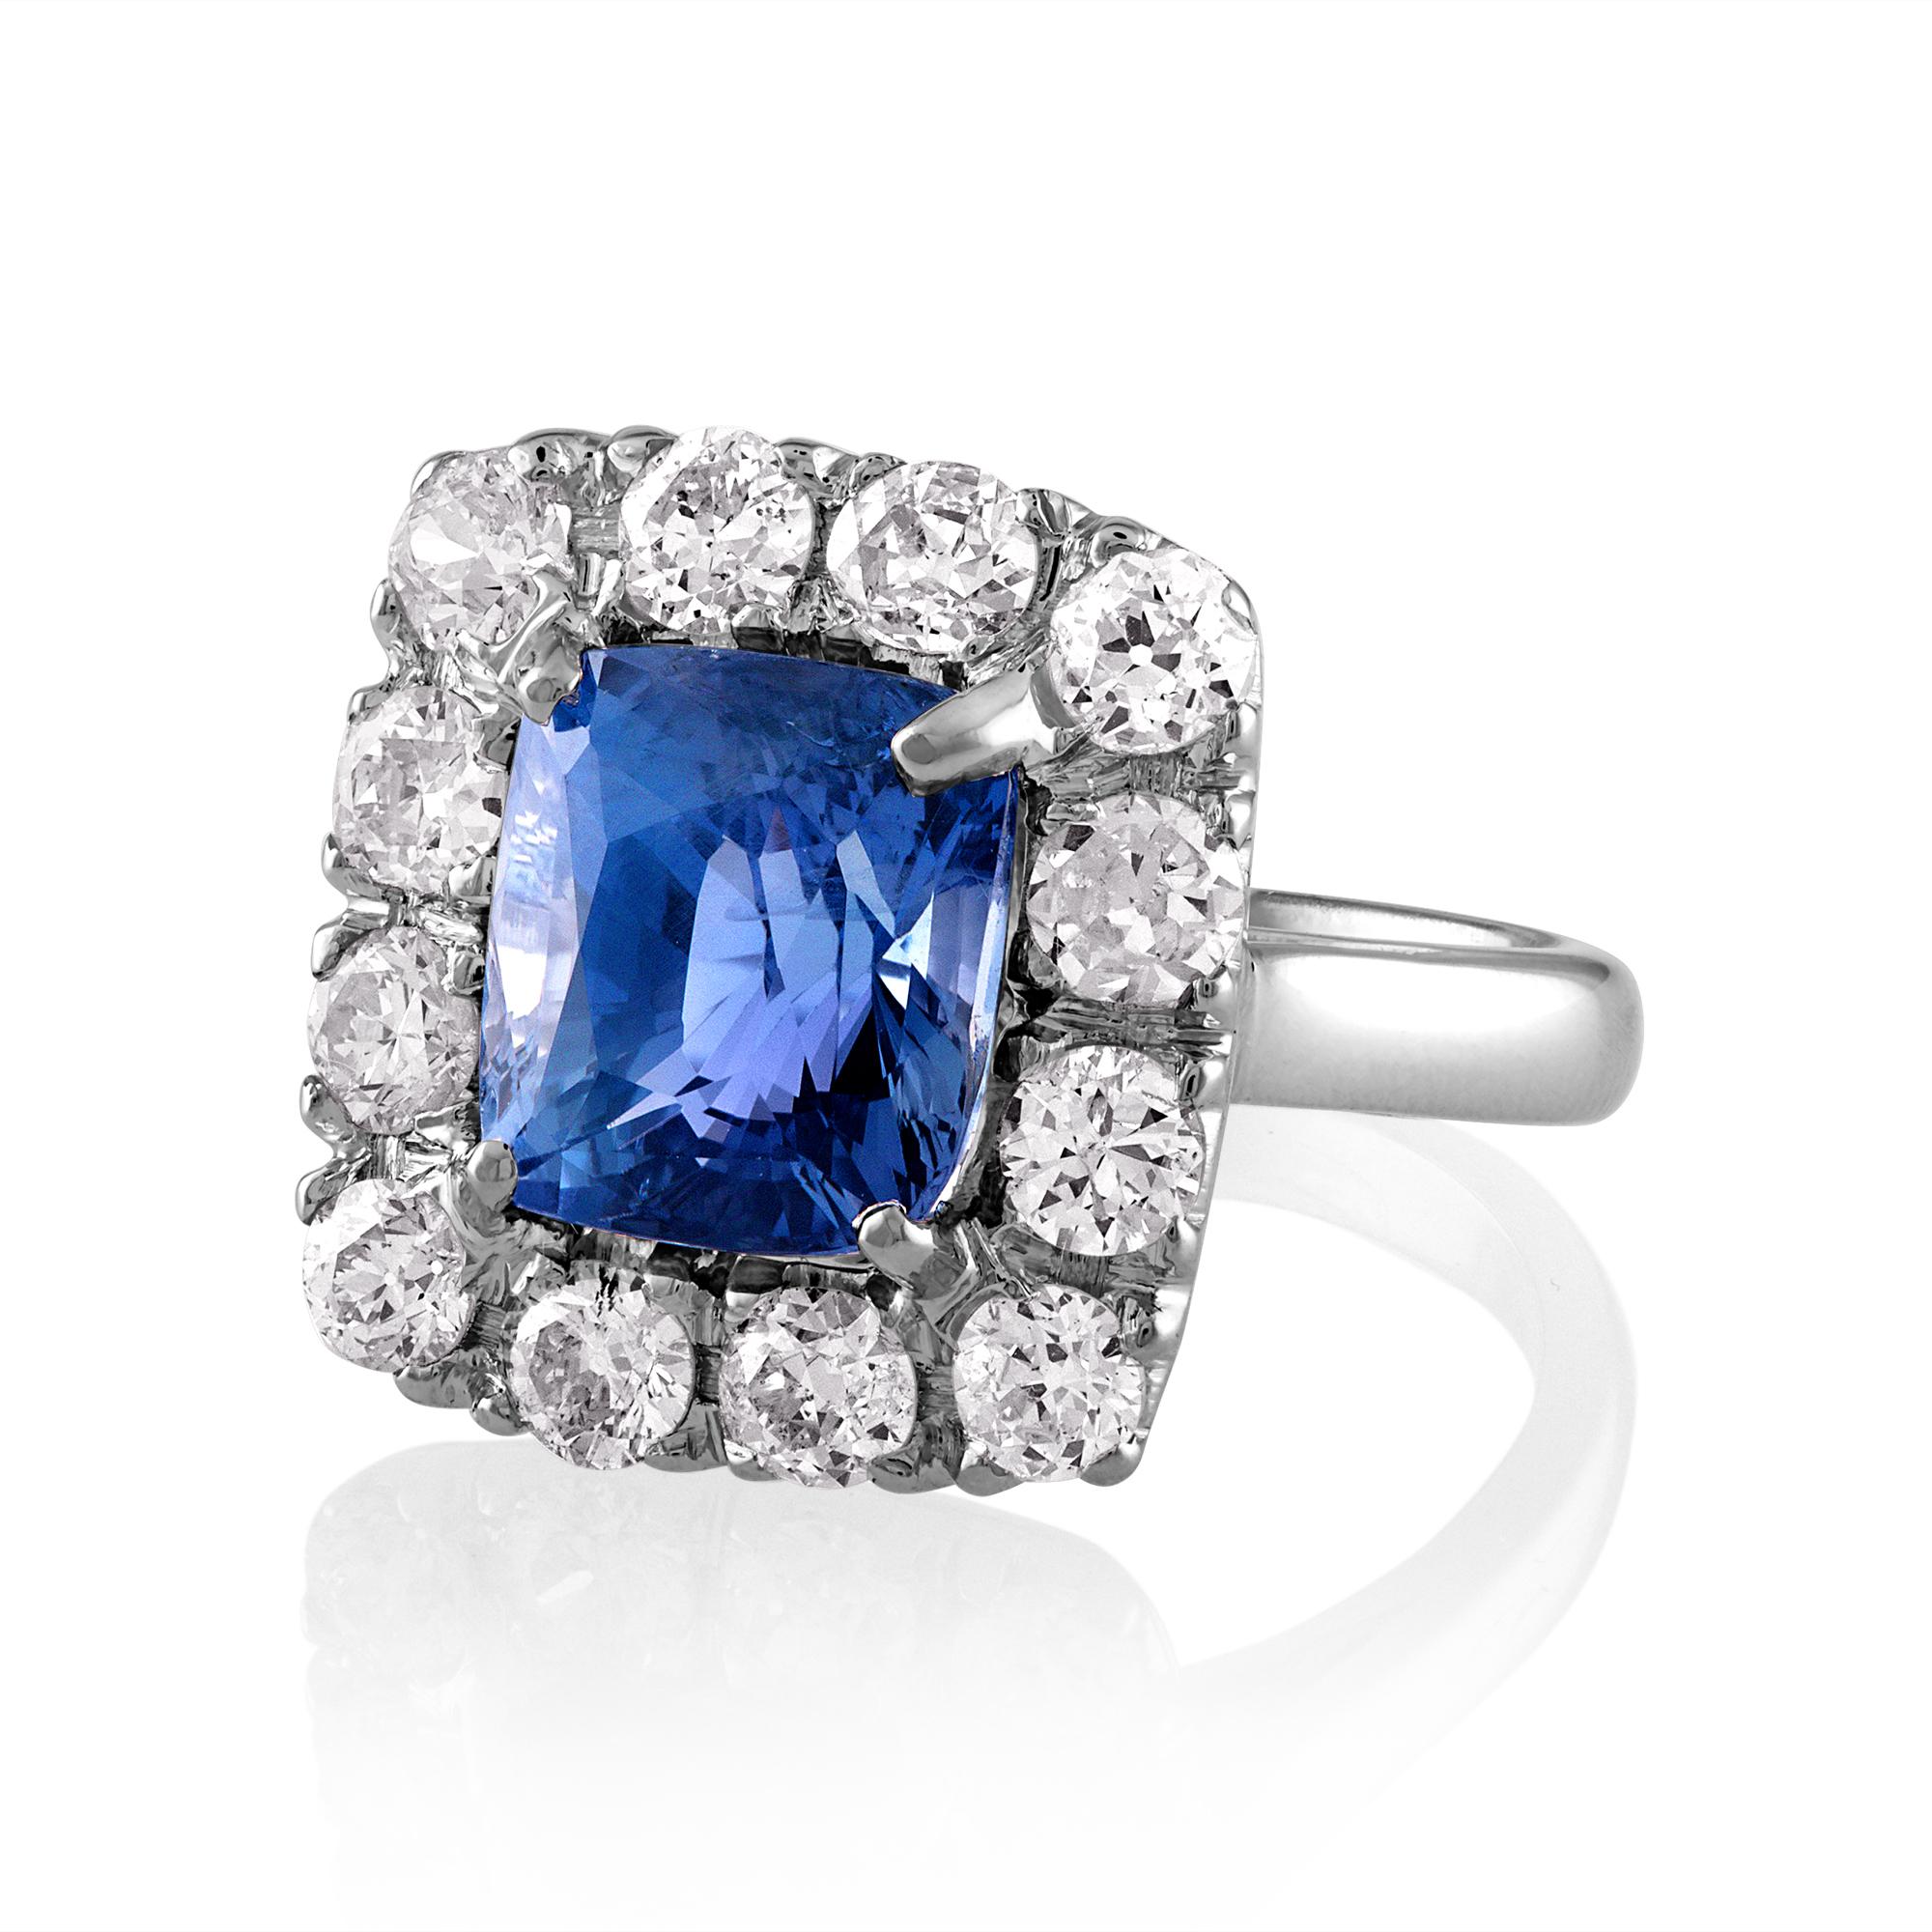 Gorgeous Timeless Rare Vintage AGL 8.65CTW Unheated Color-Shift Ceylon Sapphire and Diamond Ring 18KWG.

Classic Vintage Mid-century 8.65ctw Natural Ceylon Unheated Color-Change Sapphire & Diamond Cluster Ring. Make a sparkling statement with this